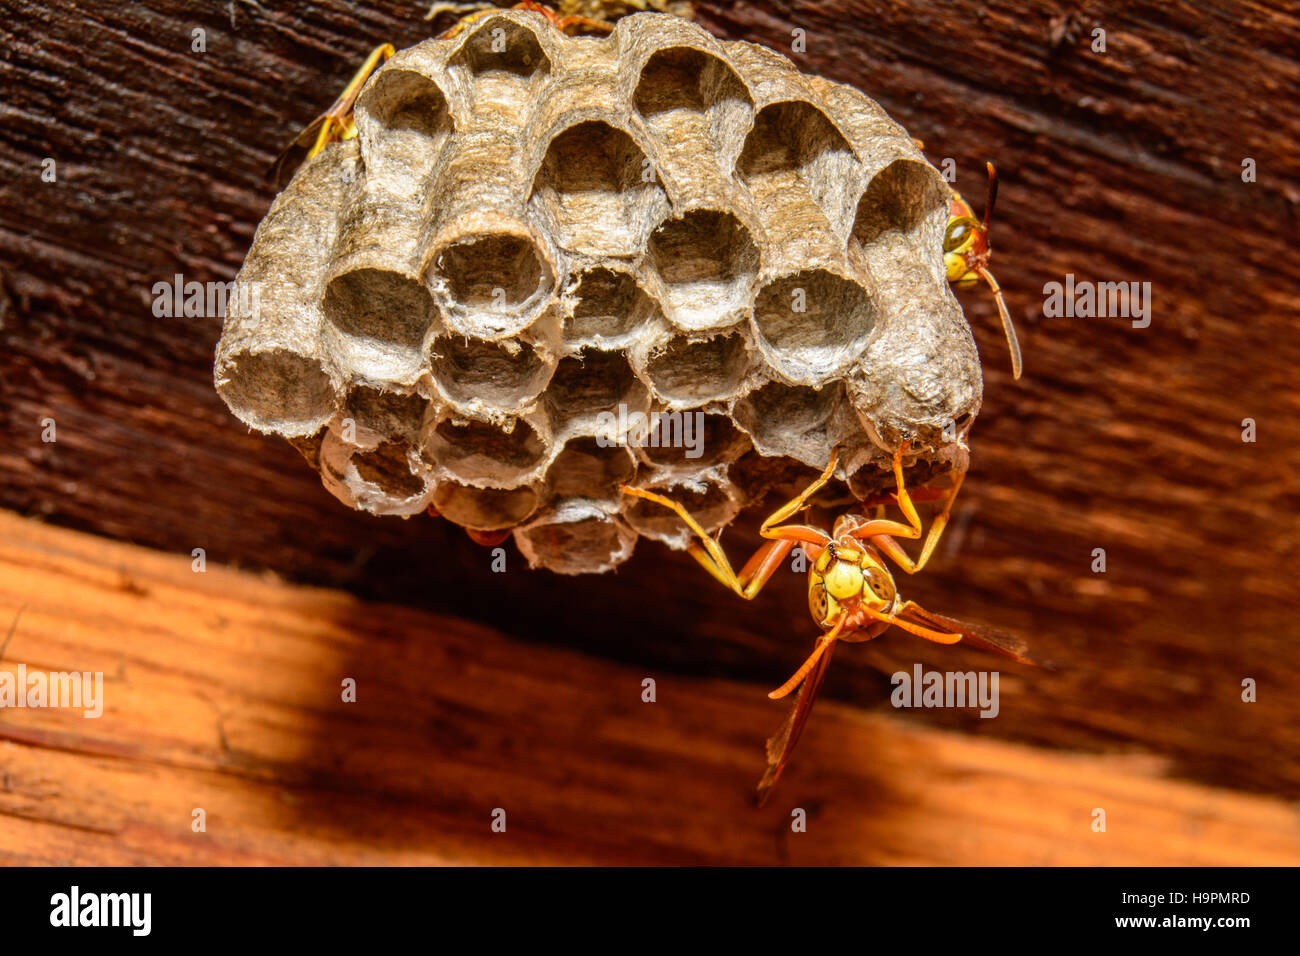 Paper Wasp (Polistes species) Nest with wasp guarding and ready to sting Stock Photo